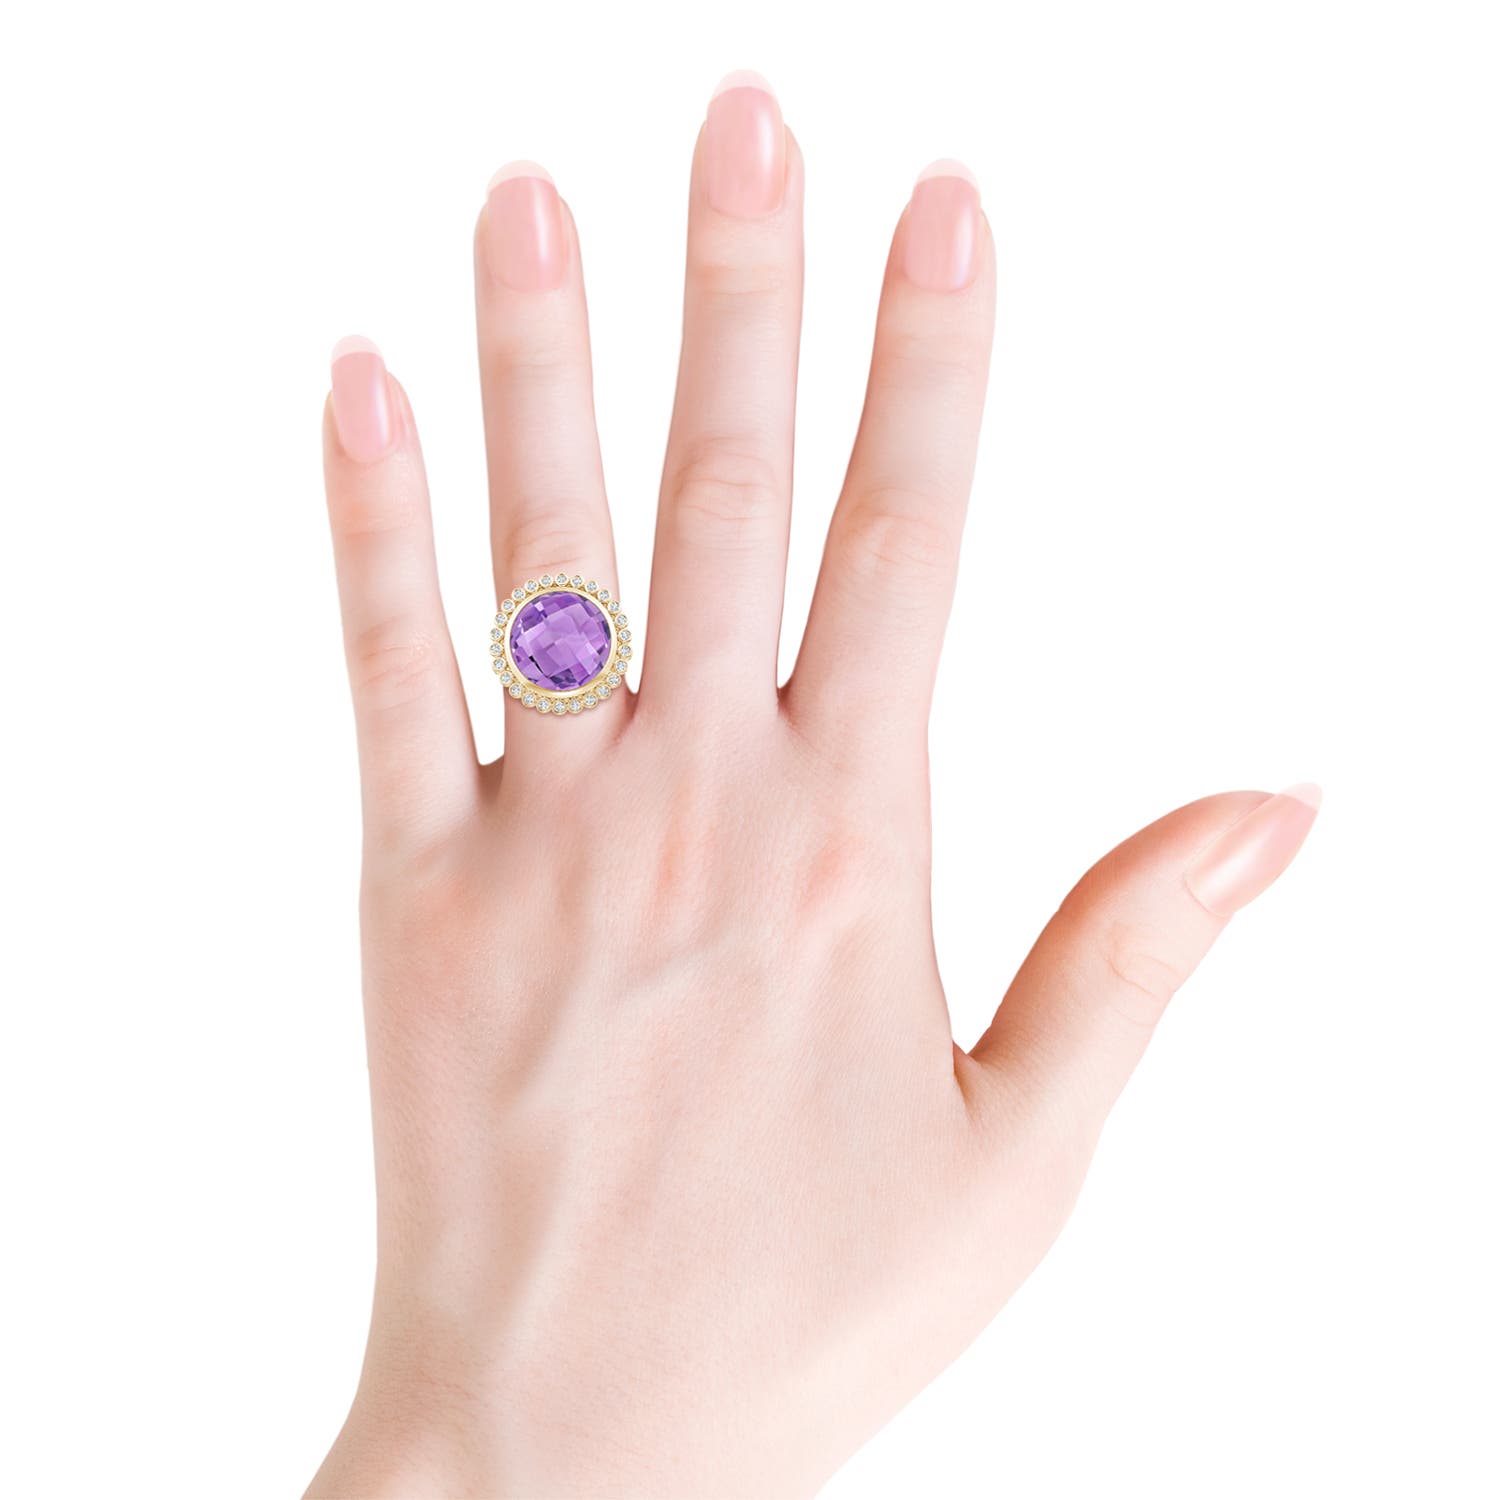 A - Amethyst / 8.16 CT / 14 KT Yellow Gold